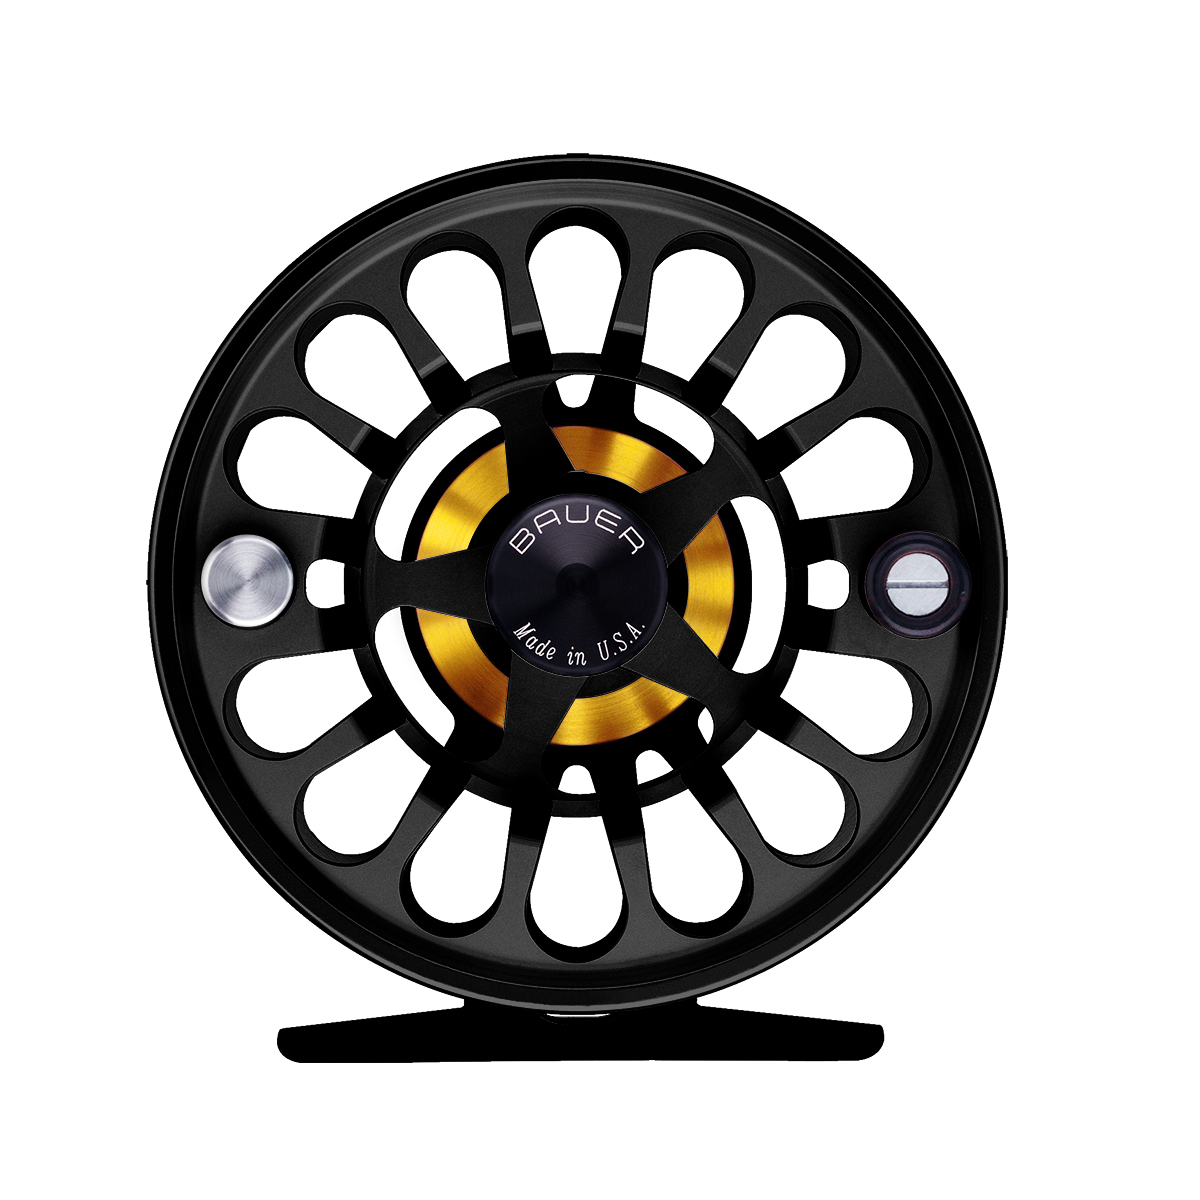 Bauer RX Fly Fishing Reel Product Details